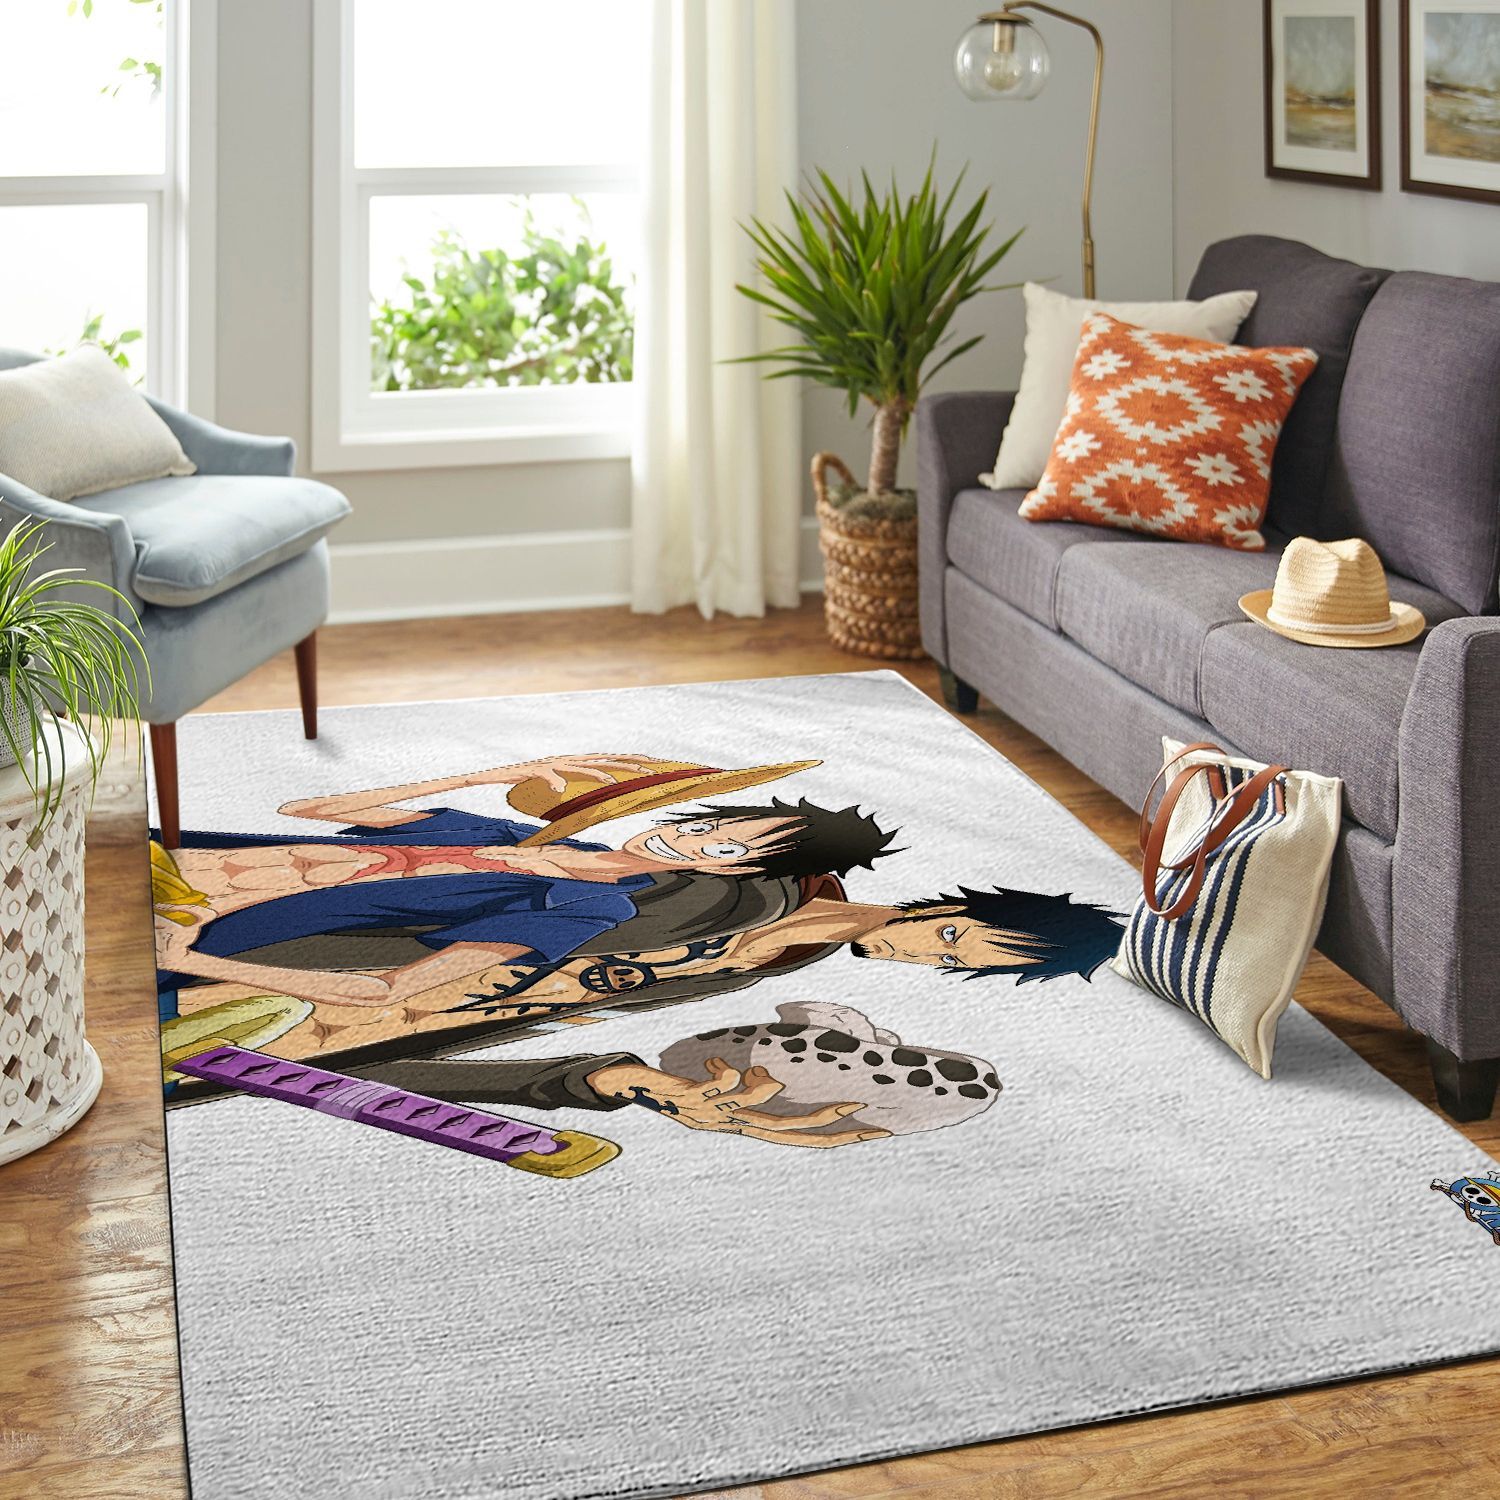 Amazon Onepiece-luffy Living Room Area No6439 Rug